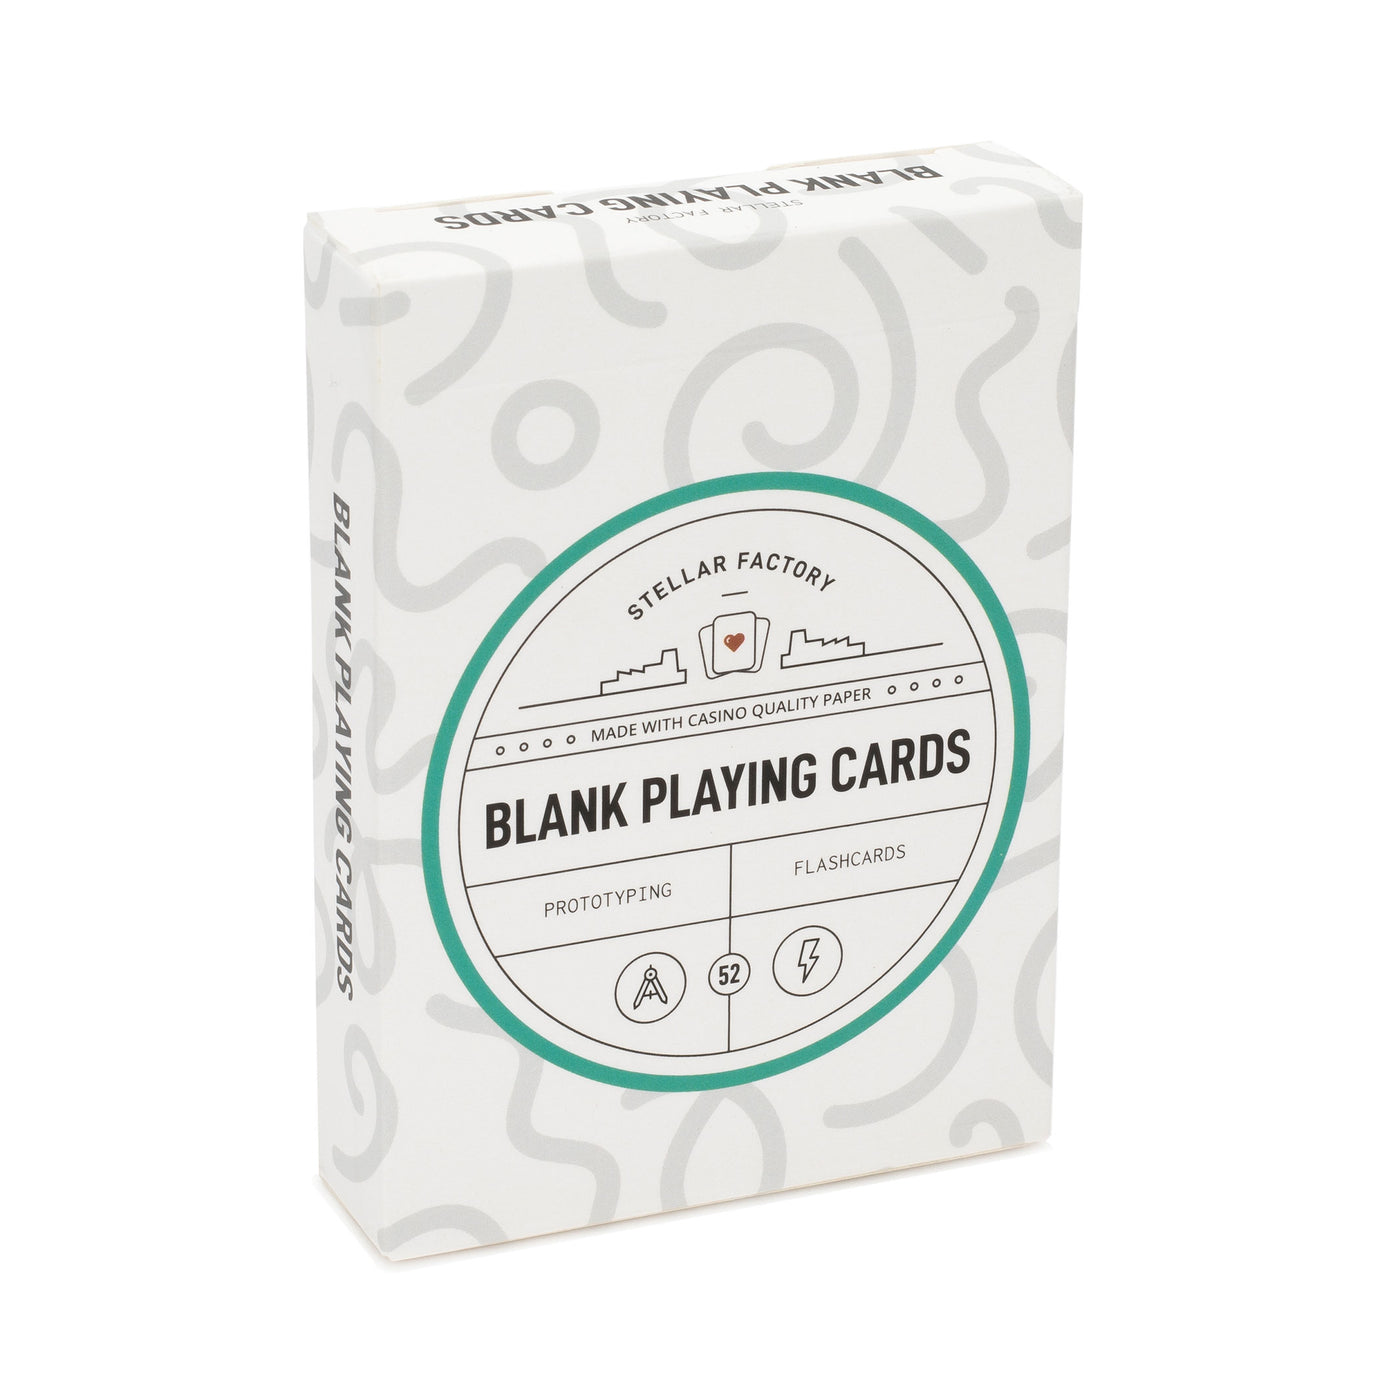 Front packaging of Blank Playing Cards